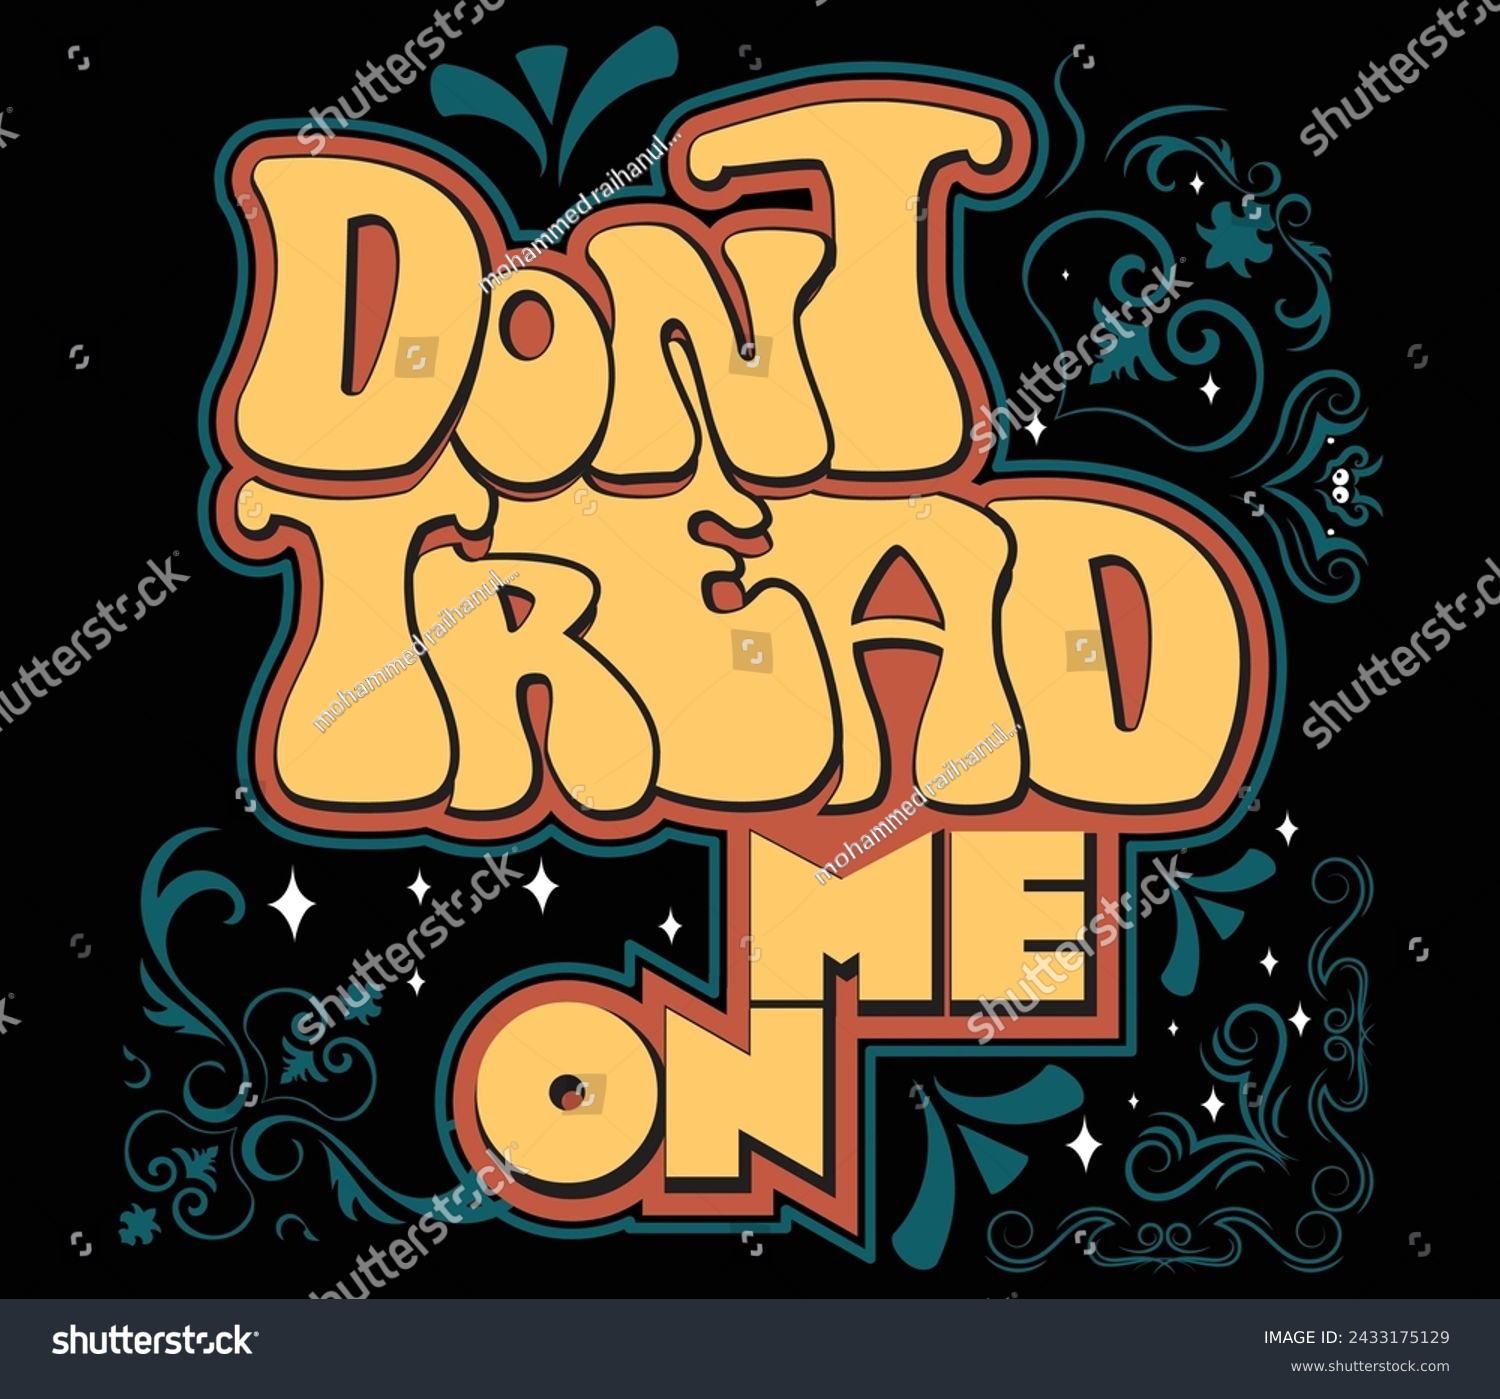 SVG of DONT TREAD ON ME t-shirt design. You can print this design for Sweater, Jumper, Hoodie, T-shirt, Mug, Pillow, Sticker, etc.
 svg